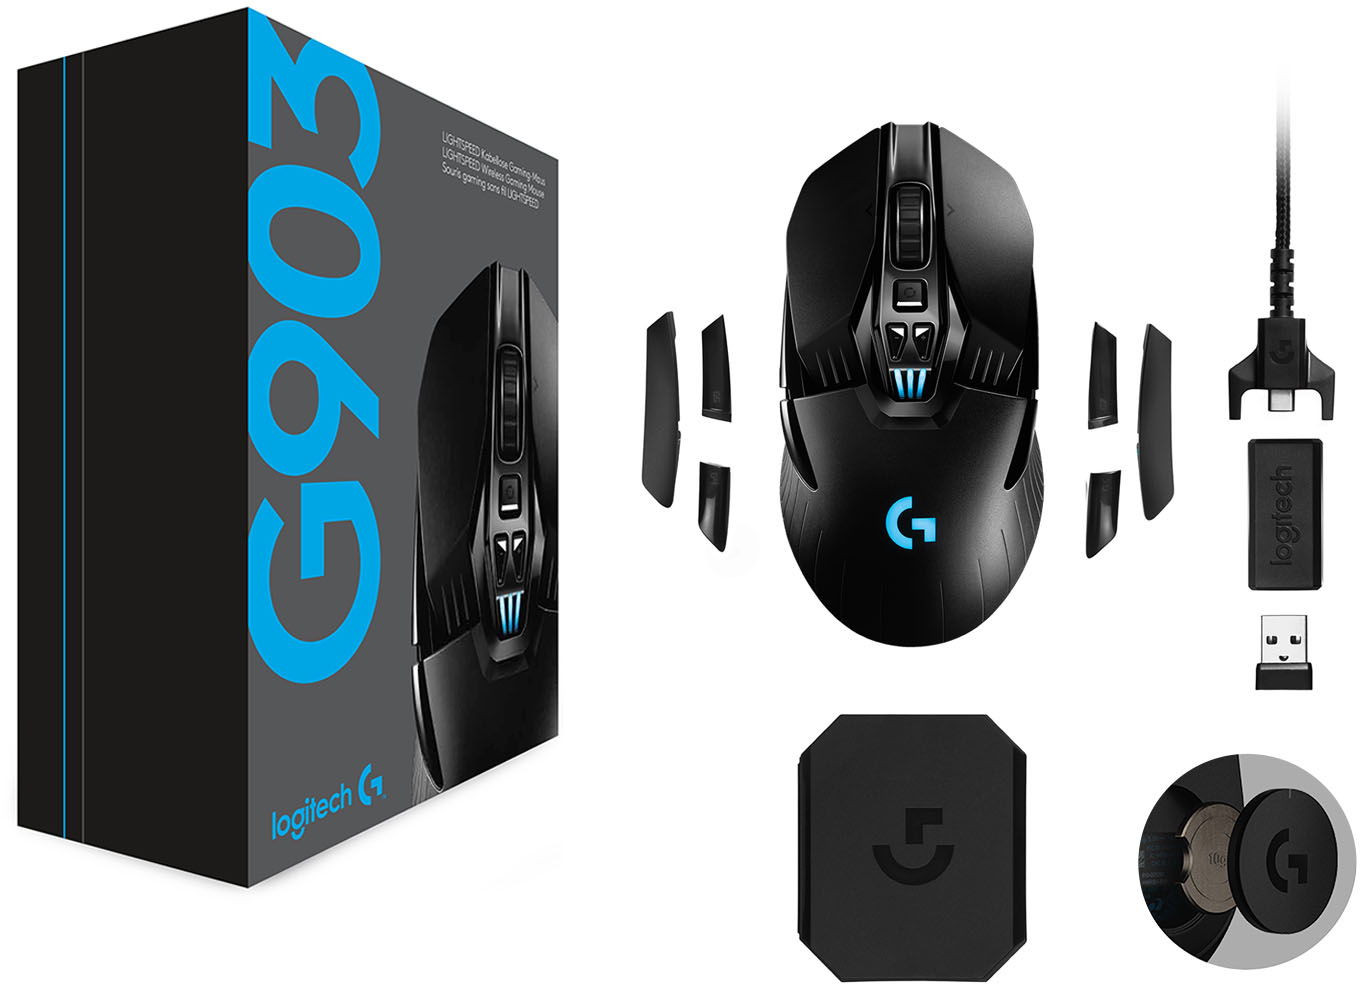 Logitech G903 LIGHTSPEED Wireless Optical Gaming Ambidextrous Mouse with  RGB Lighting Black 910-005670 - Best Buy